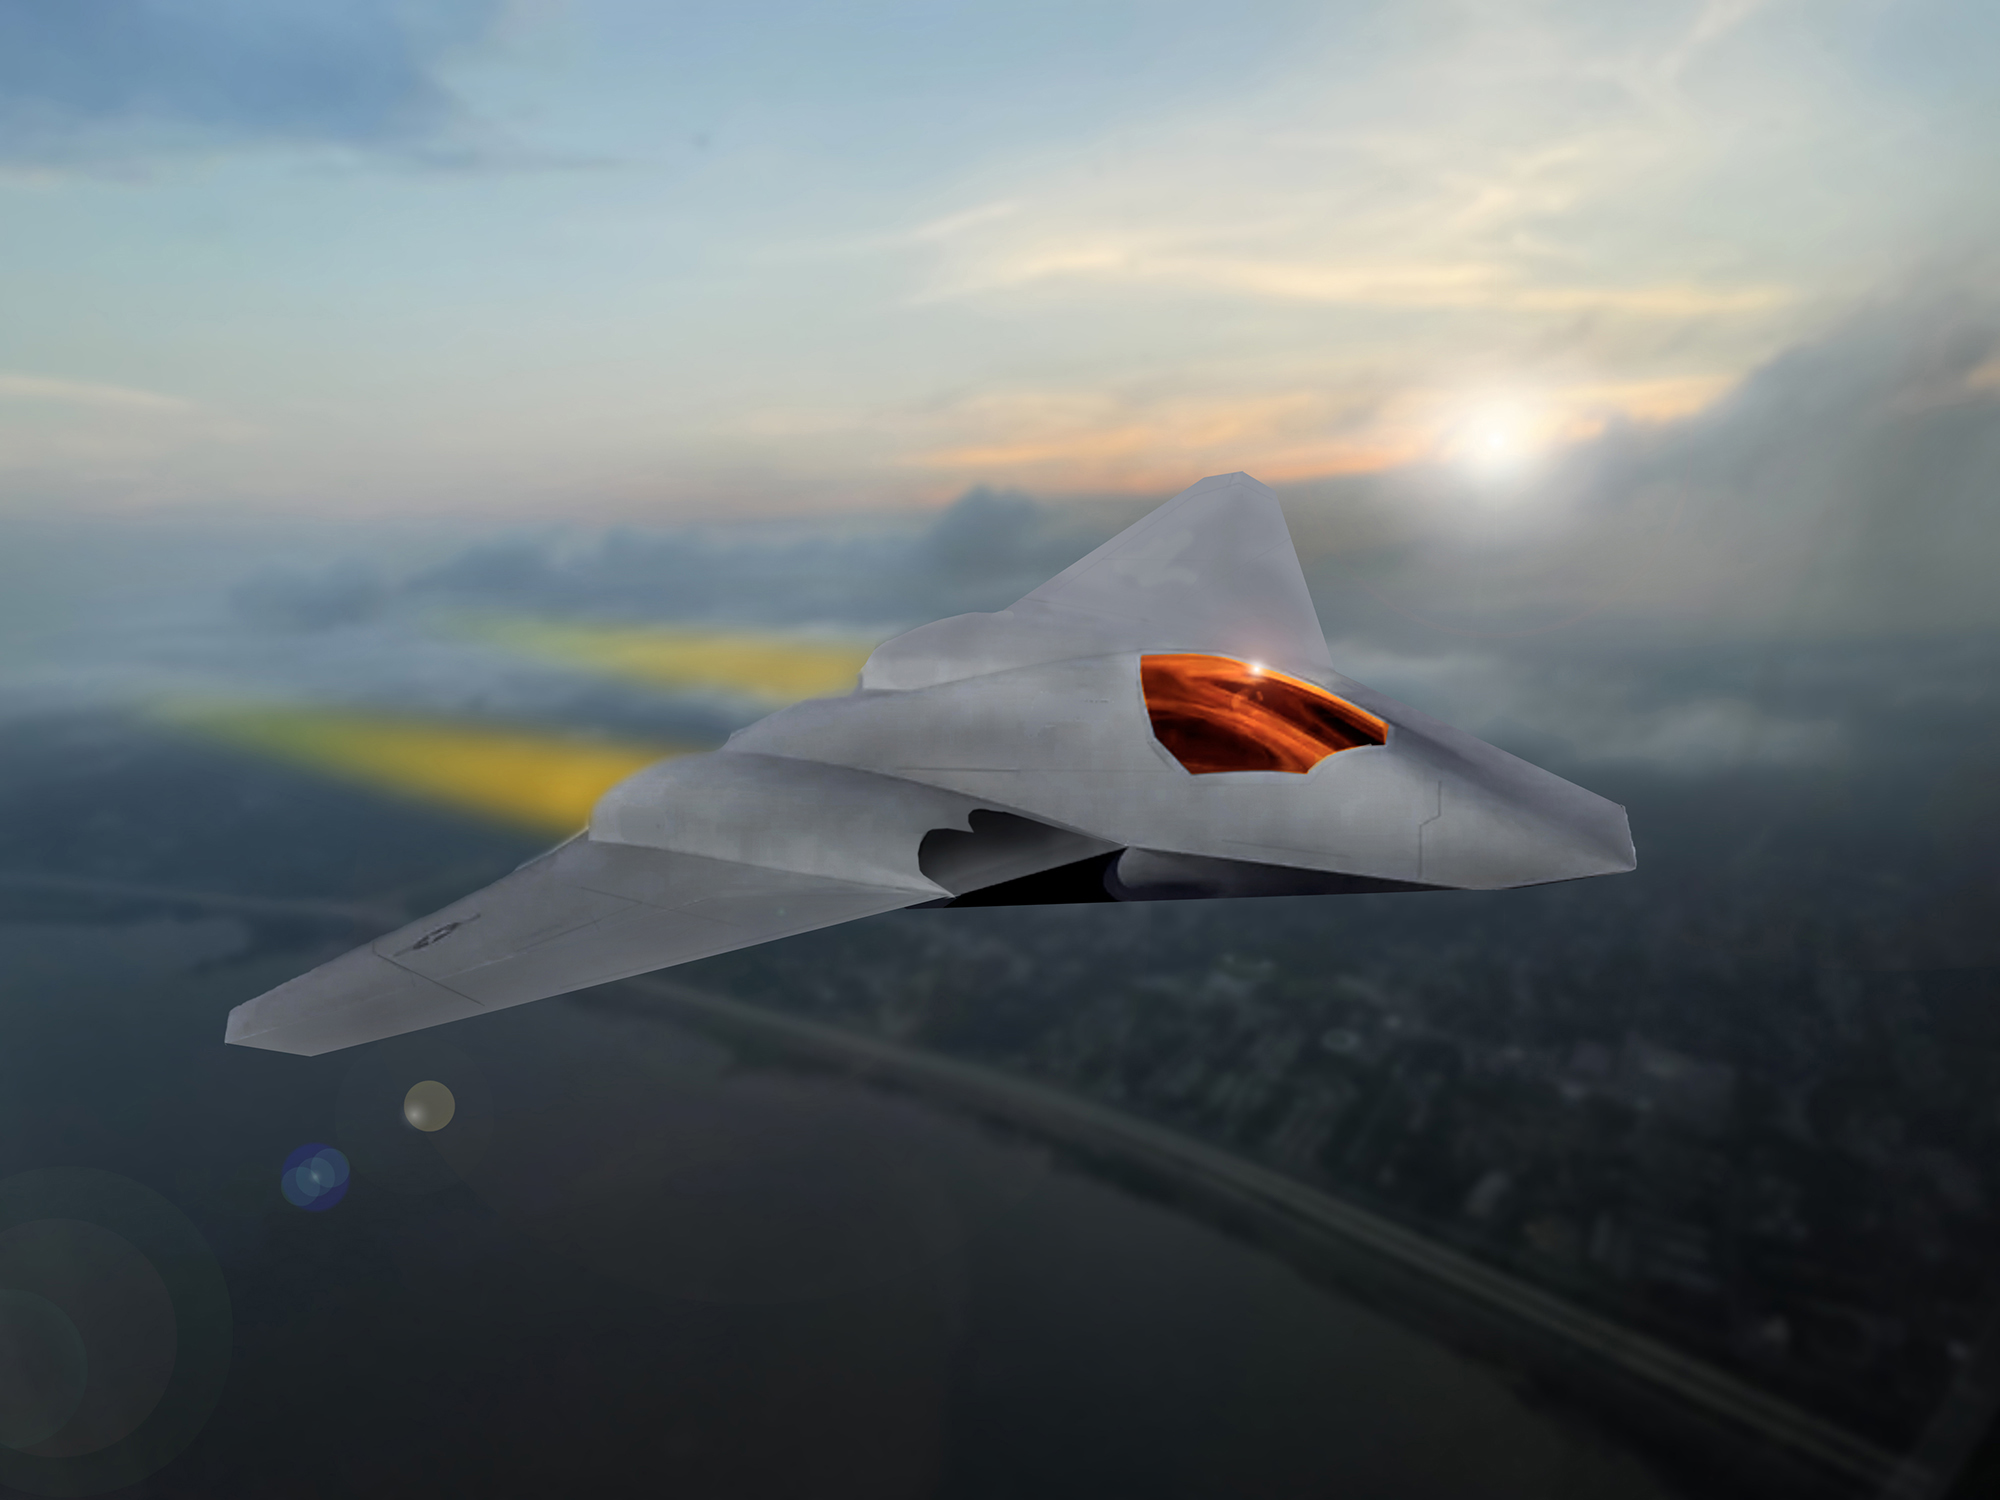 Allvin Hedges on the Future of Next-Generation Air Dominance Fighter